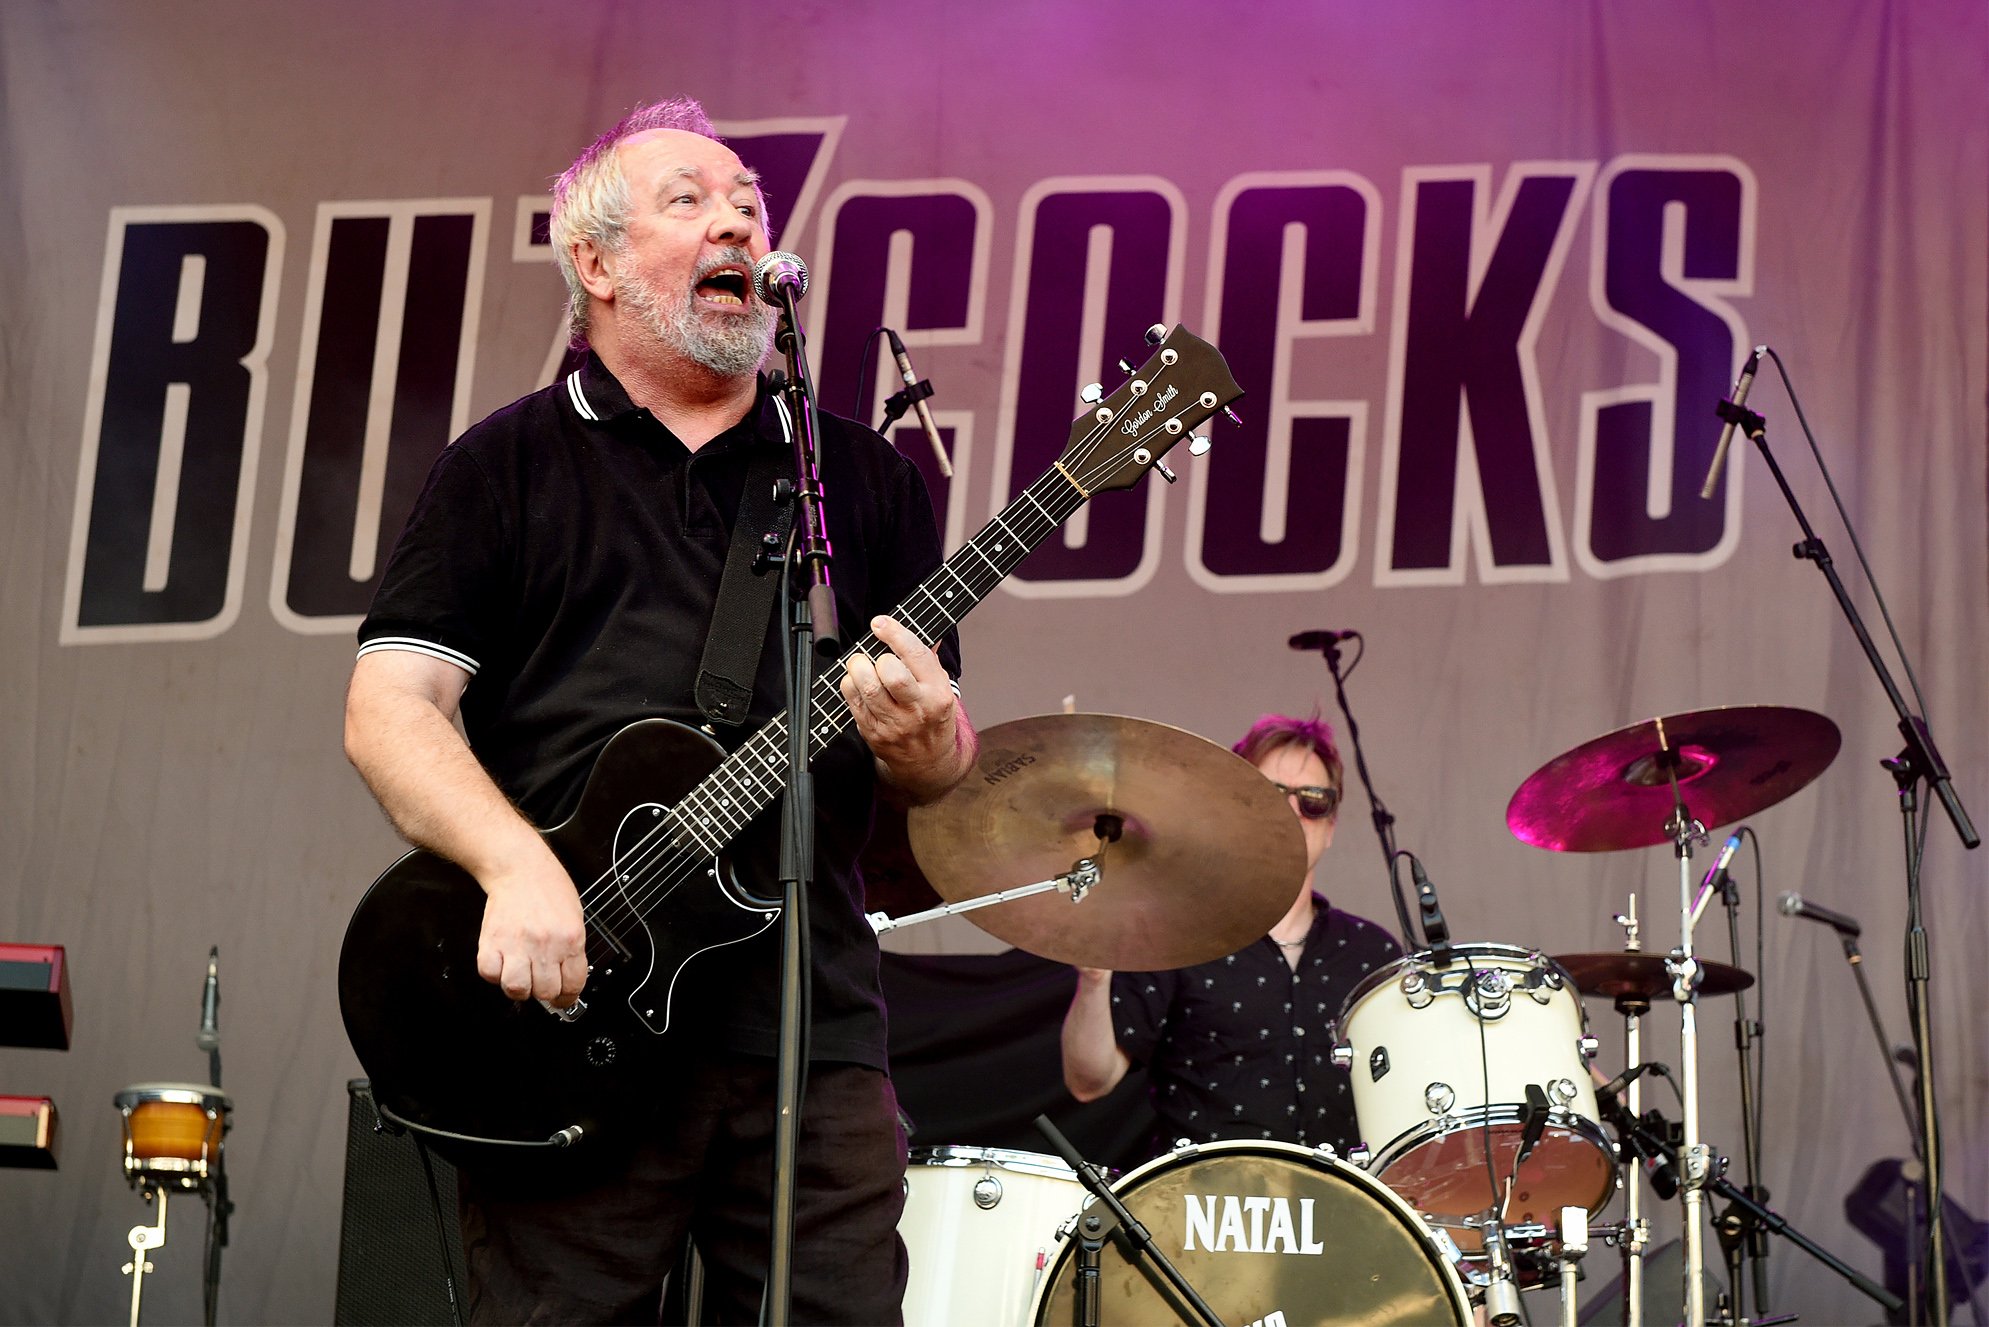 Pete Shelley of Buzzcocks performs during Sounds of the City at Castlefield Bowl on July 6, 2018 in Manchester